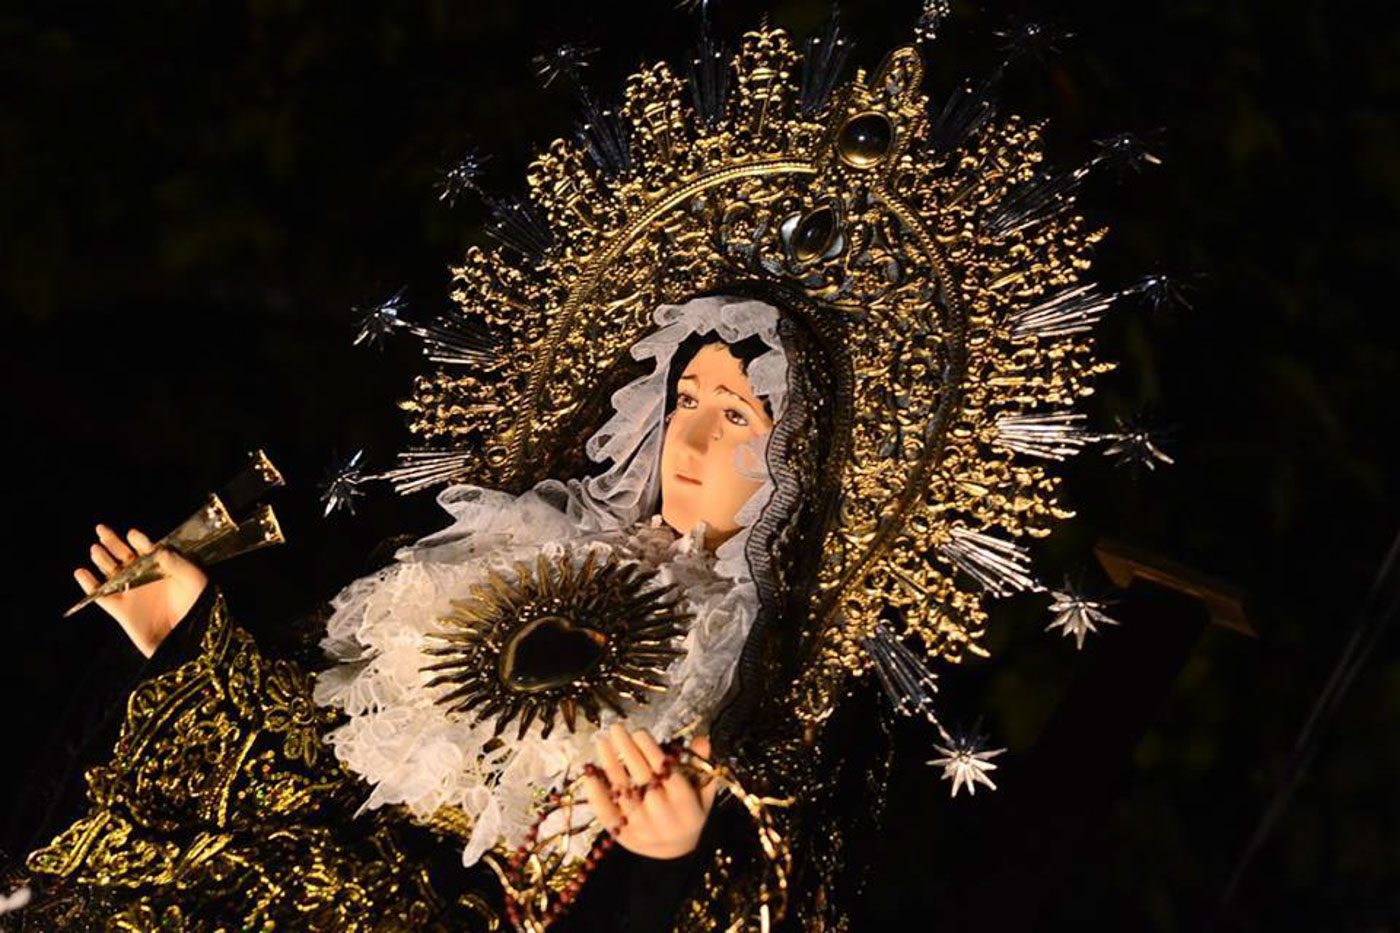 SOLEDAD/MATER DOLOROSA. She wears violet or dark blue and red on Wednesday procession and black on Friday. Photo courtesy of Mavic Conde 